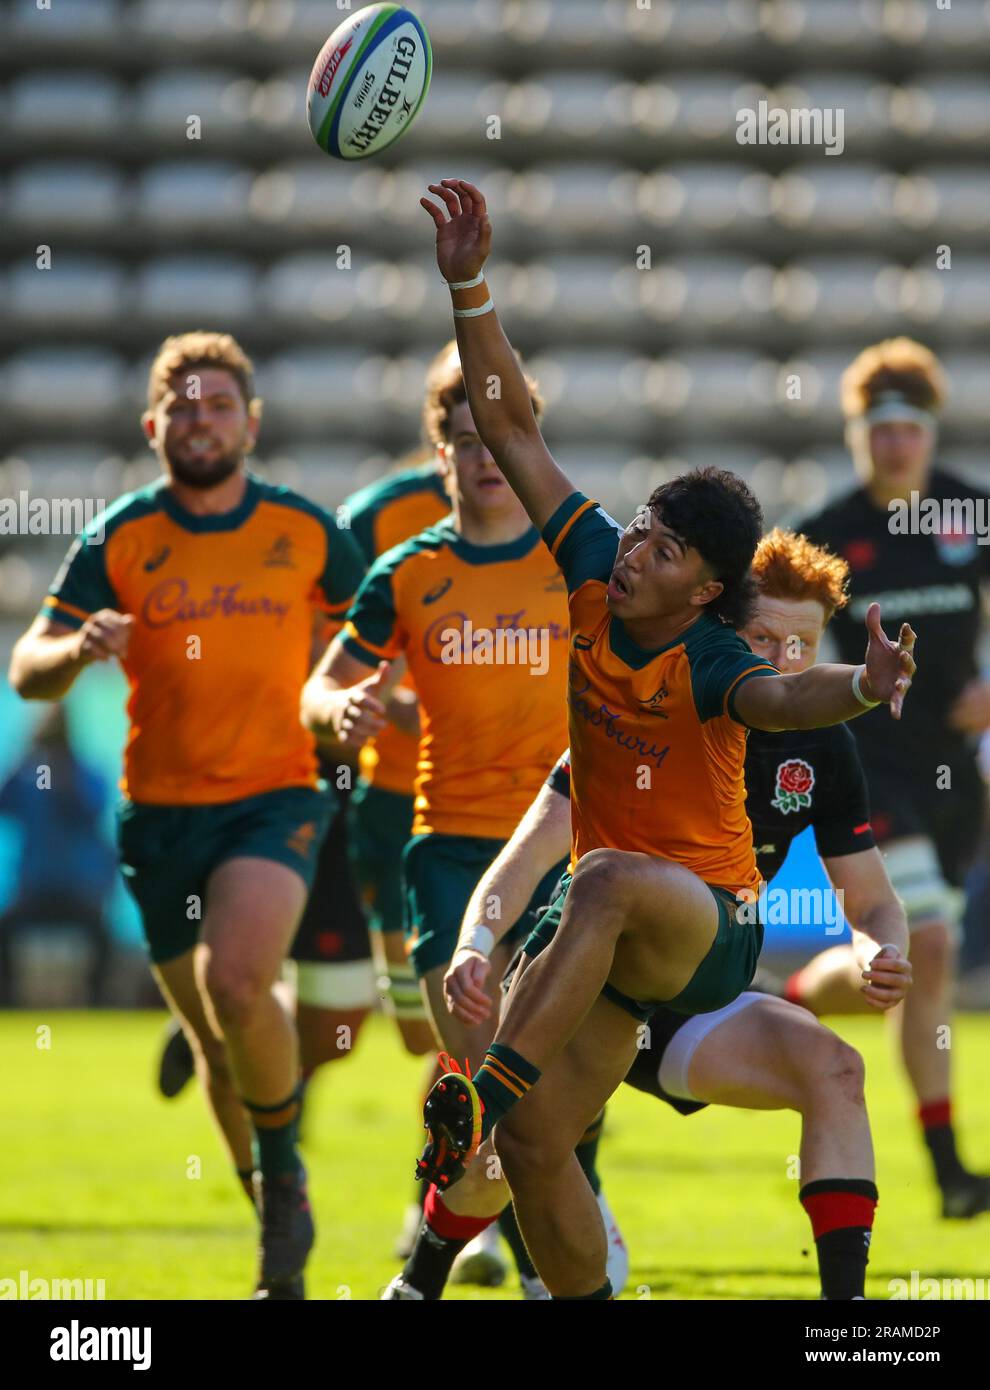 Cape Town, SOUTH AFRICA - Tuesday 04 July 2023, Ronan Leahy of Australia during the World Rugby U20 Championship match between Australia and England at Athlone Stadium in Cape Town, South Africa. Stock Photo